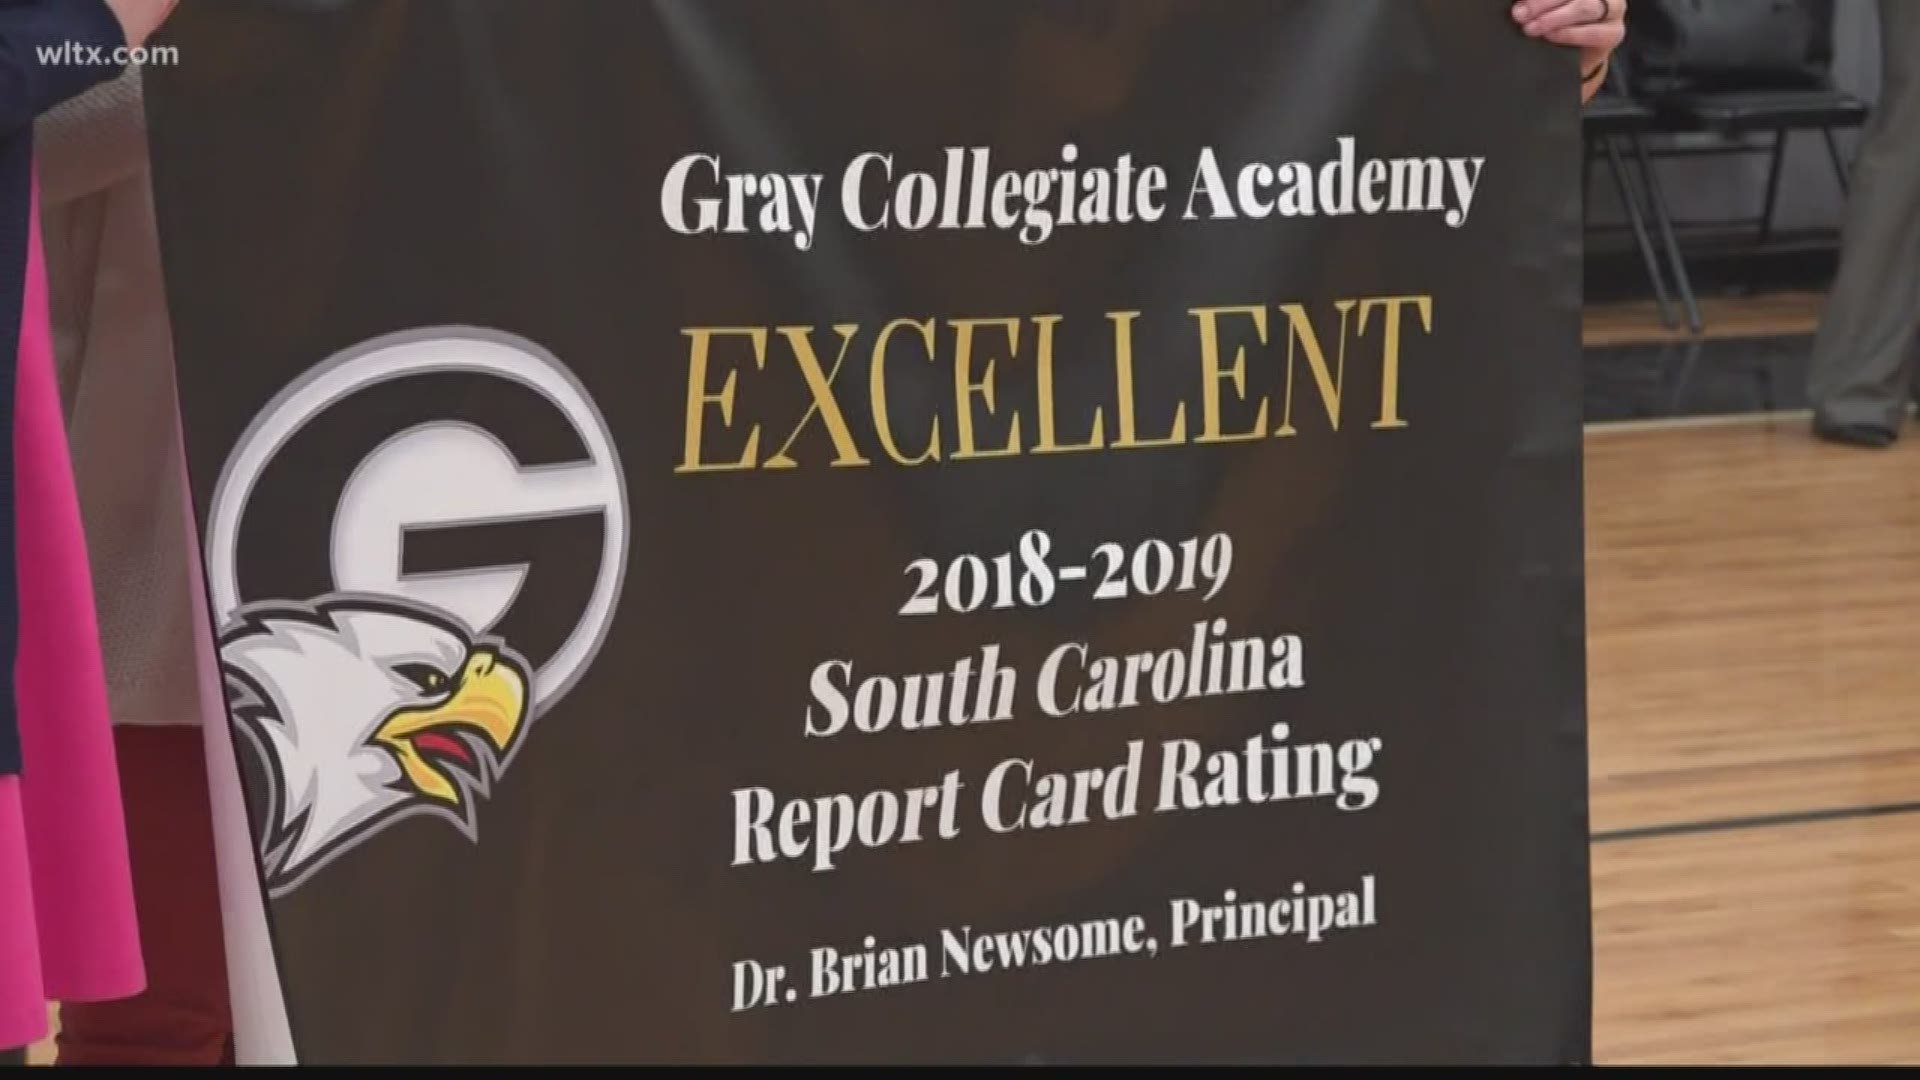 Gray Collegiate Academy is celebrating a well deserved 'excellent' rating on their South Carolina report card.